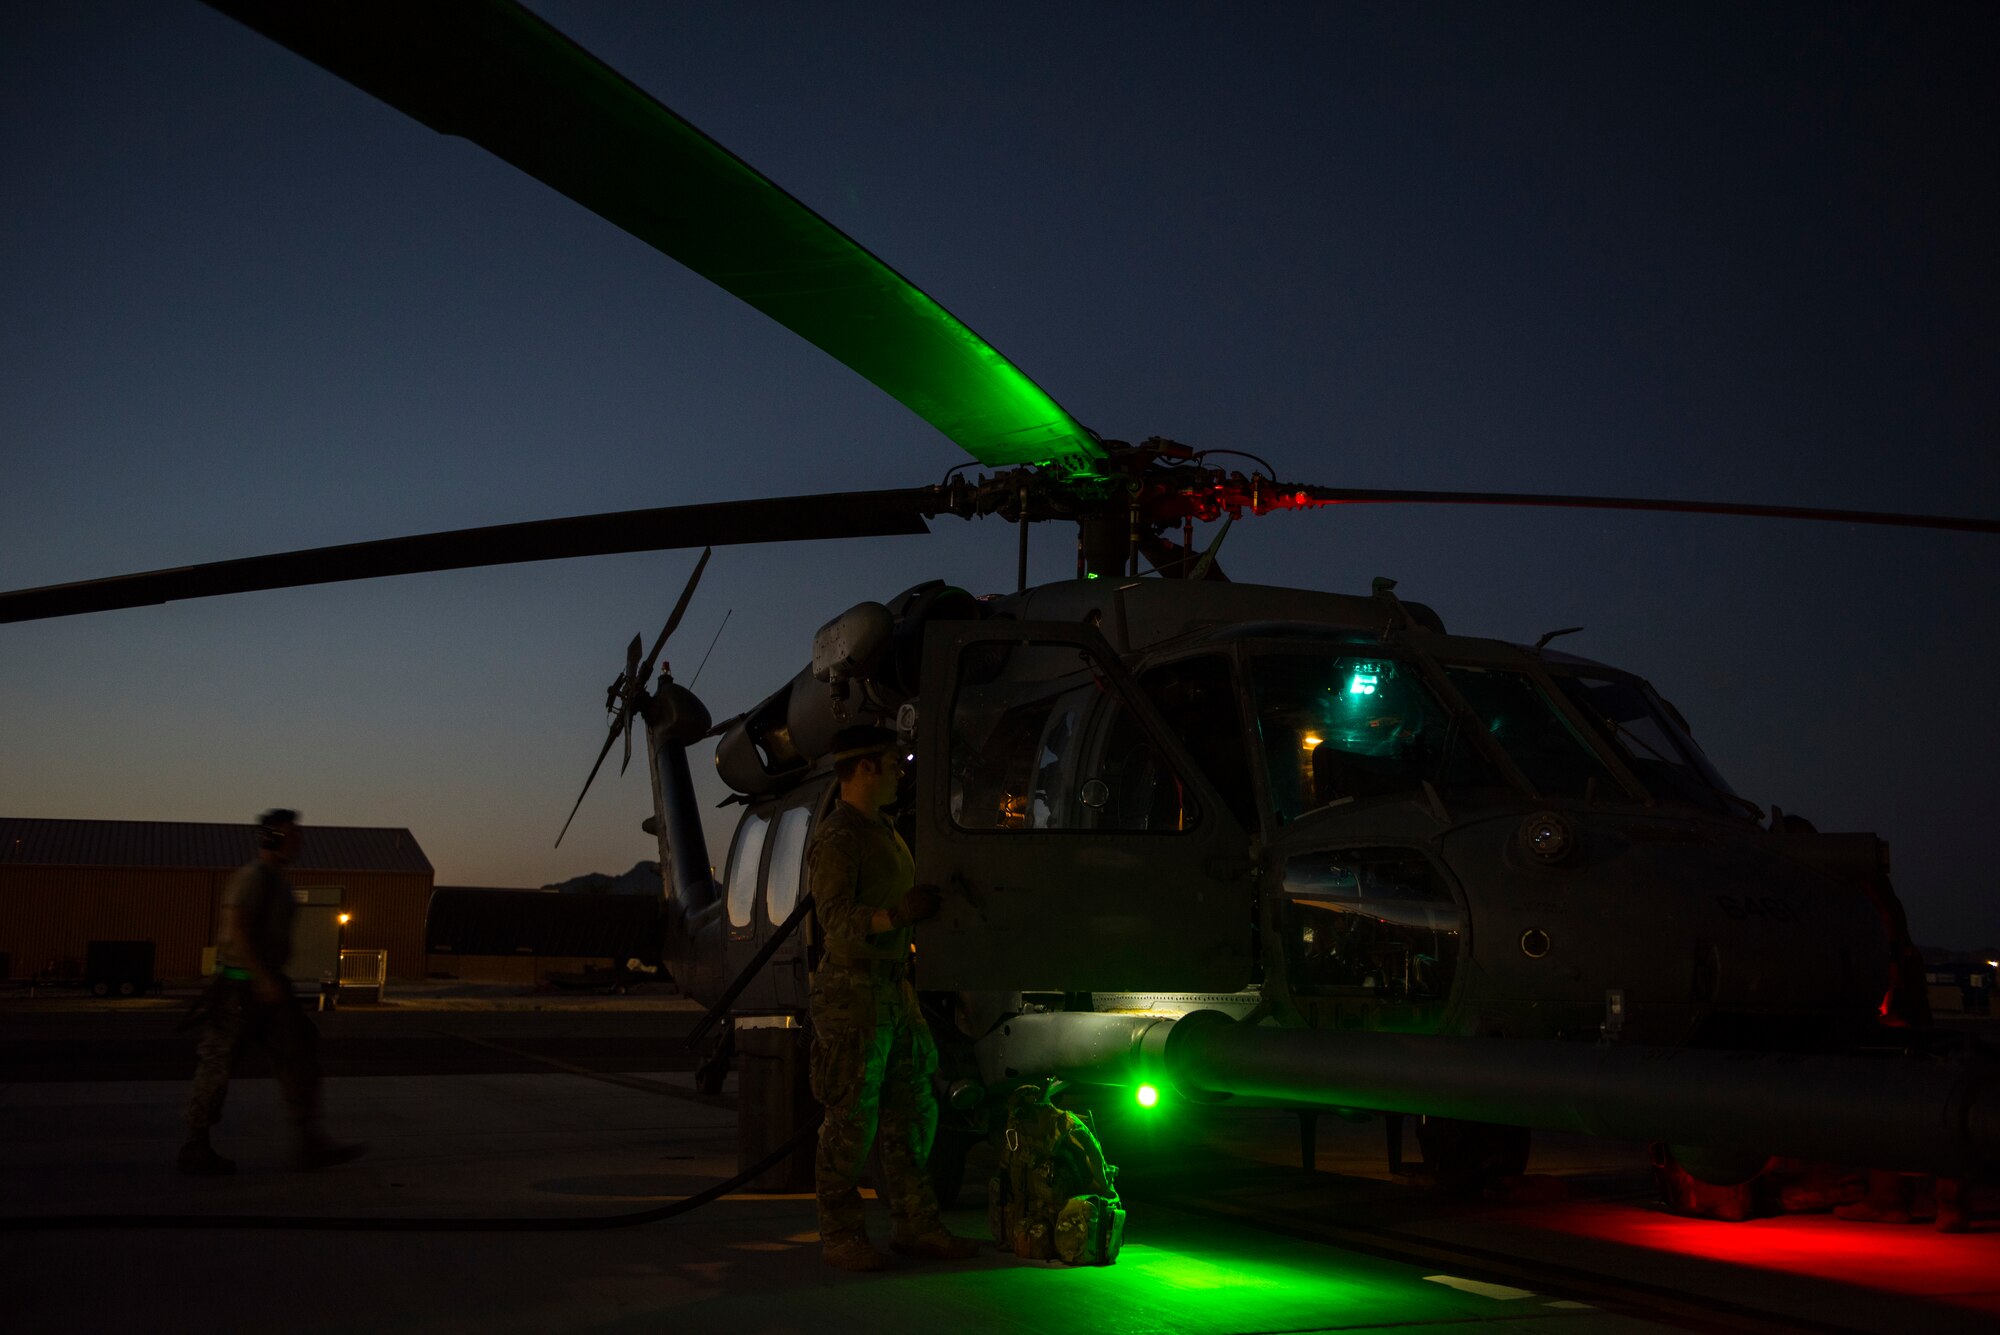 A crew prepares an HH-60G Pave Hawk helicopter prior to a large-scale U.S. Air Force Weapons School Integration Phase training exercise June 11, 2018 at Nellis Air Force Base, Nev. The USAFWS trains tactical experts and leaders to control and exploit air, space and cyberspace assets on behalf of the joint force. (U.S. Air Force photo by Staff Sgt. Joshua Kleinholz)